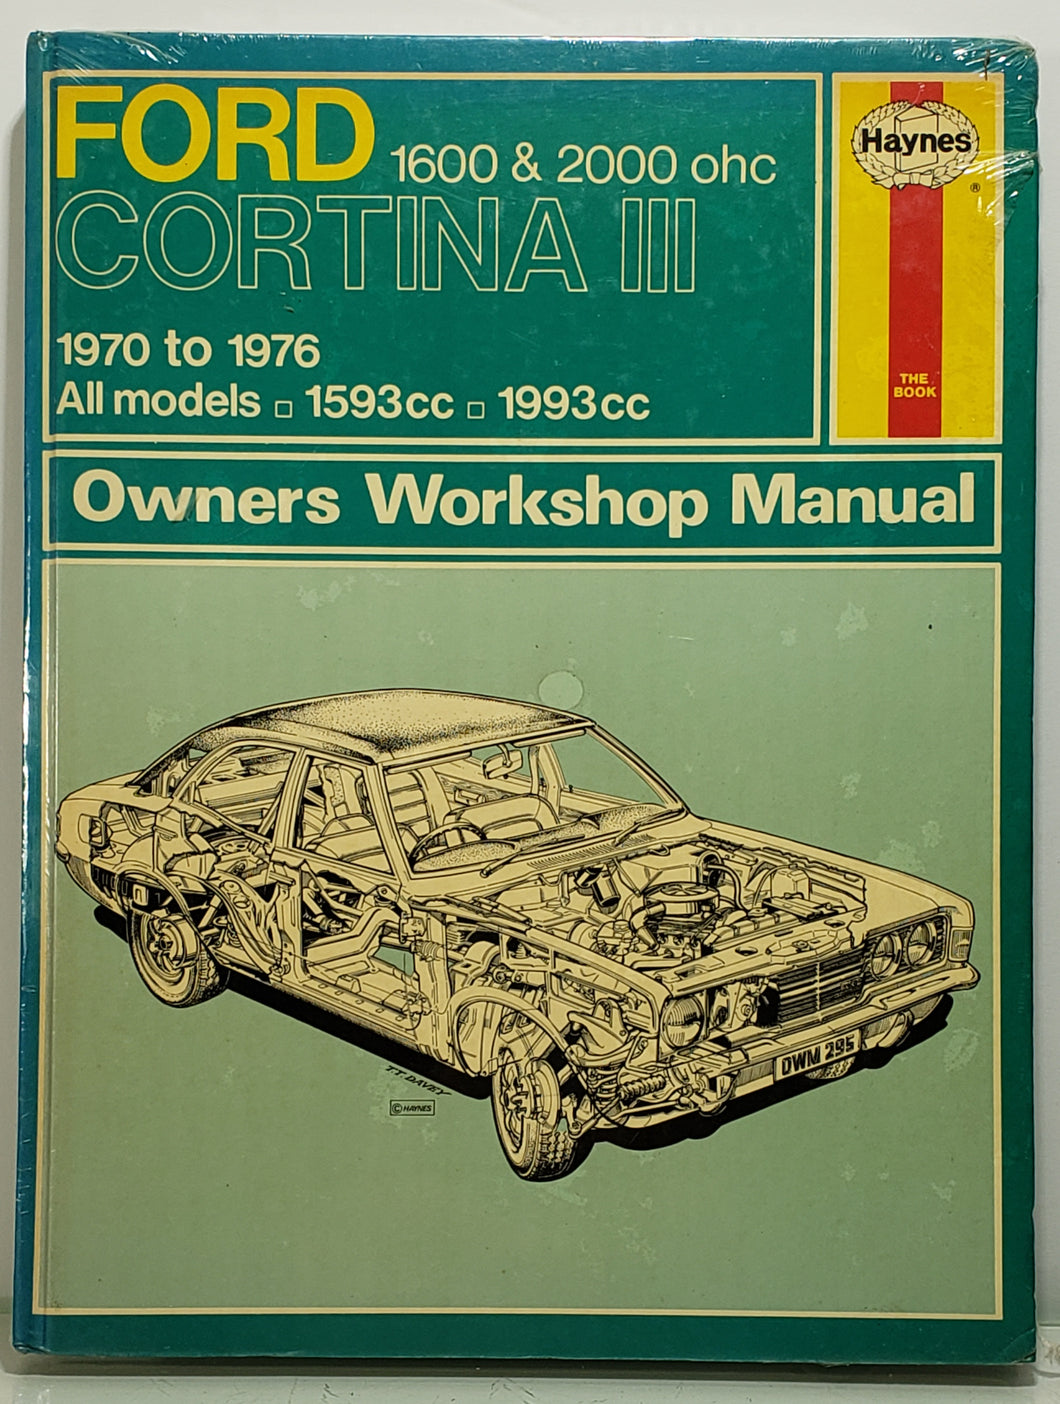 Ford Cortina III 1600 & 2000 Ohc Owners Workshop Manual (Service & repair manuals)